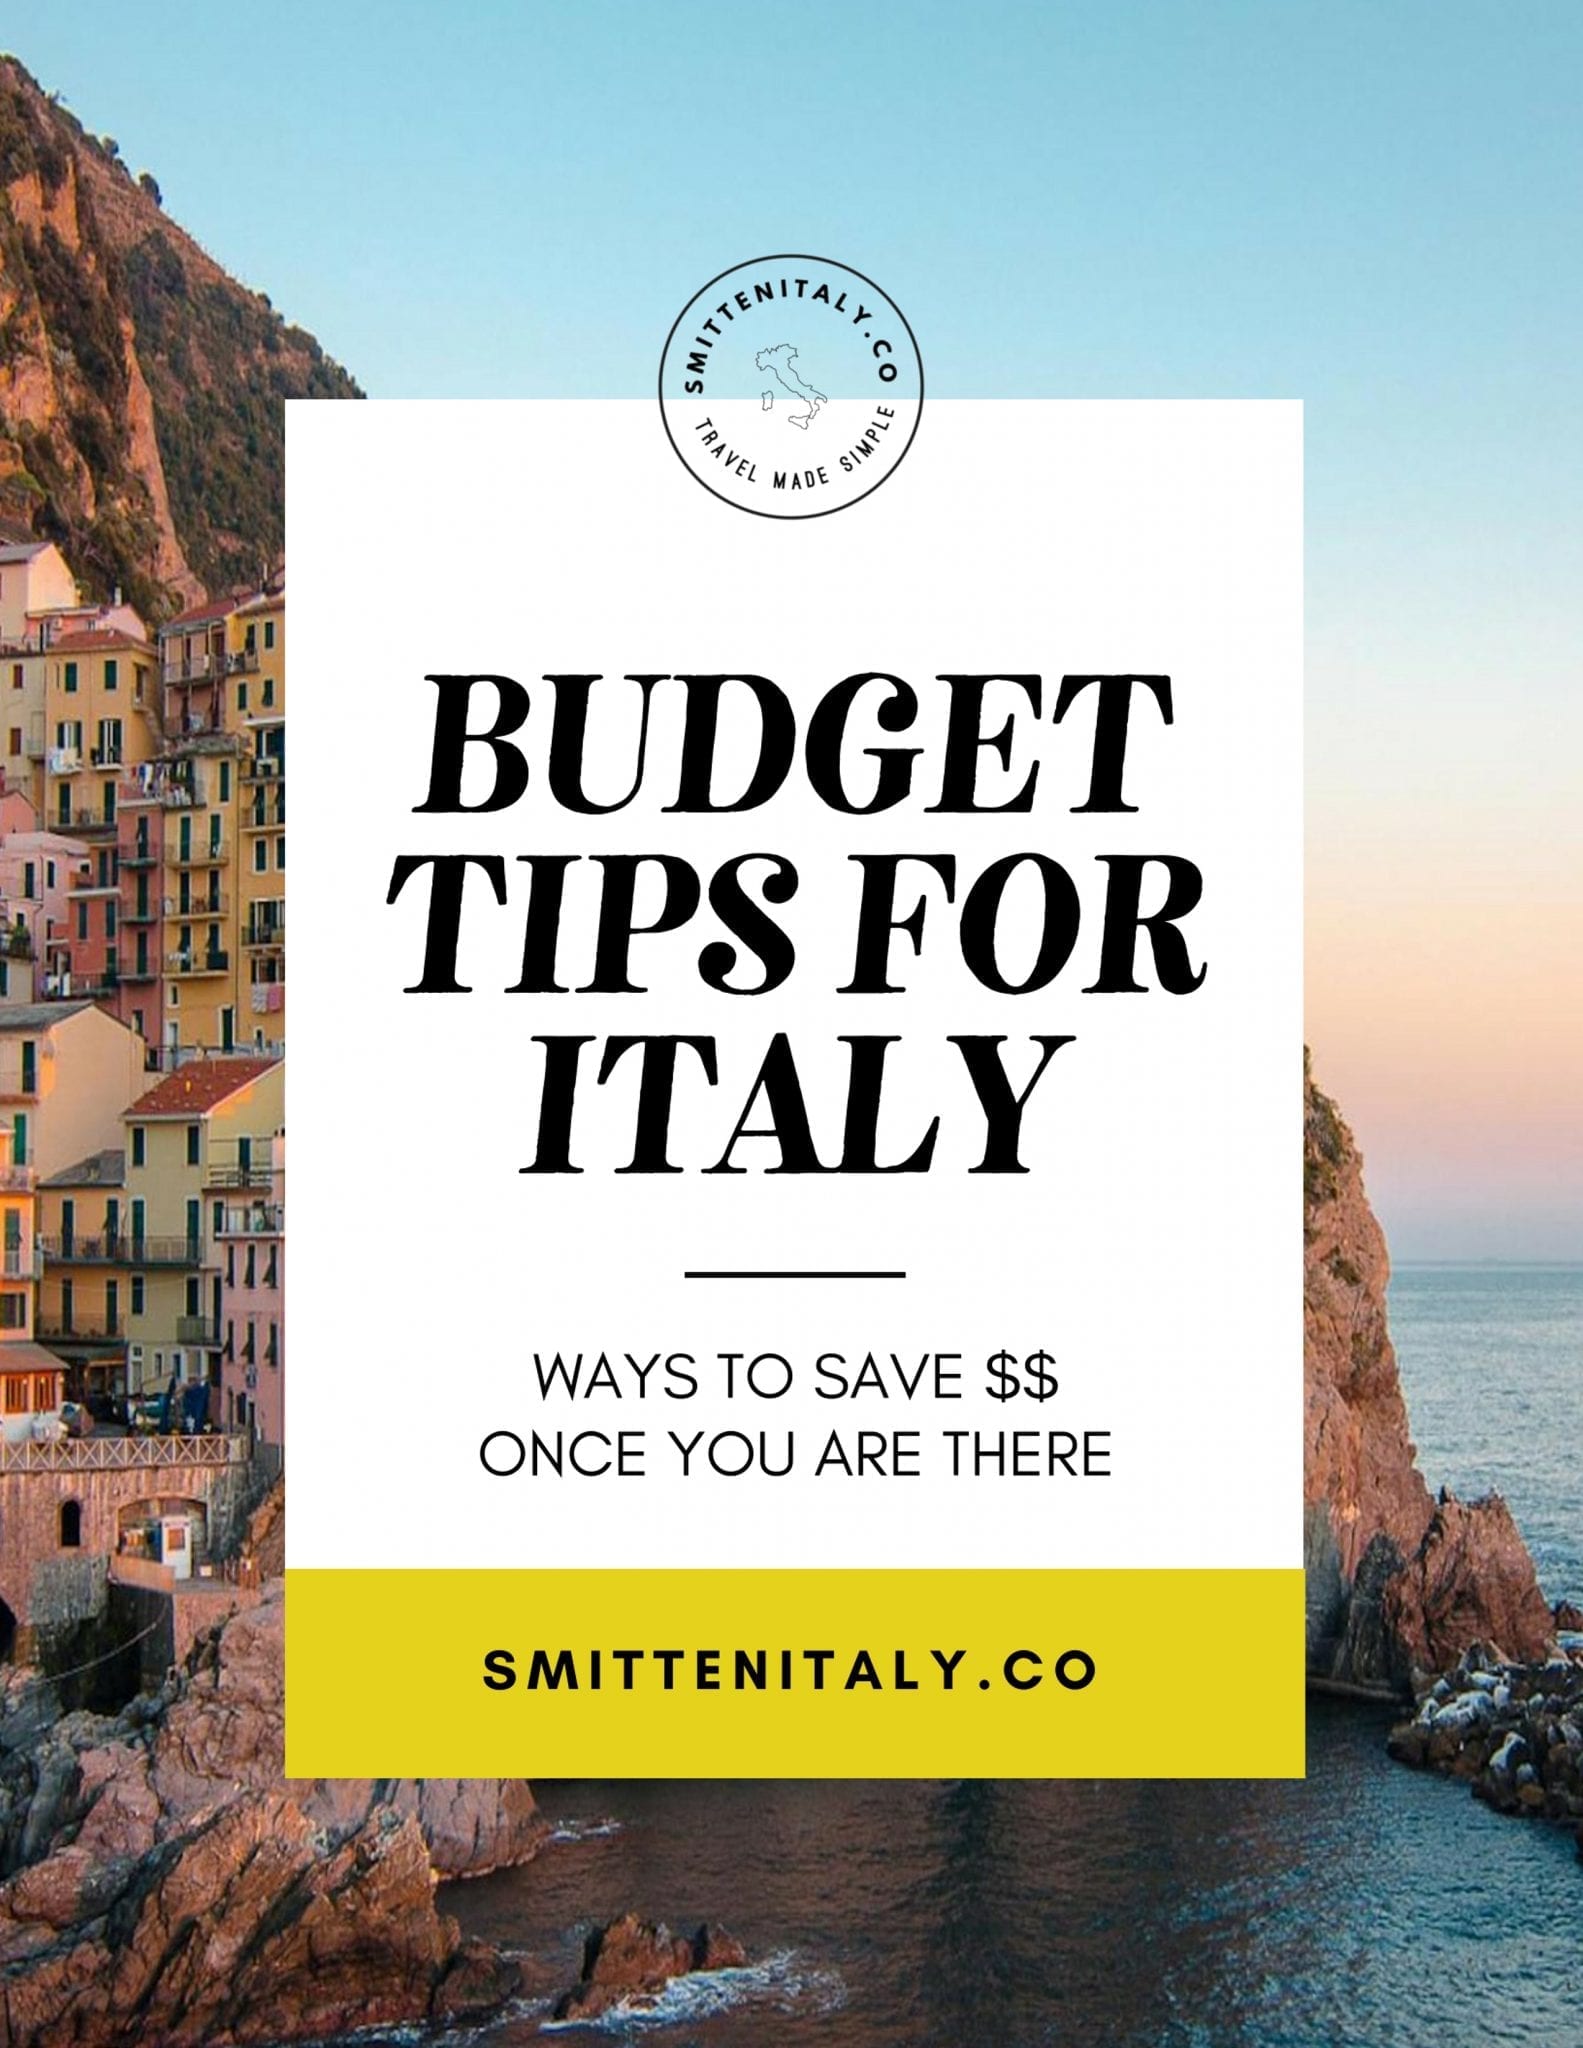 Italy Travel Tips: There are so many ways to cut your spending and still have a wonderful trip. Today I'm sharing my favorite ways of saving money once you are in Italy. Read the tips & grab your copy of our budget calculator and start planning your trip now! #italytravel #italytraveltips #travelbudget